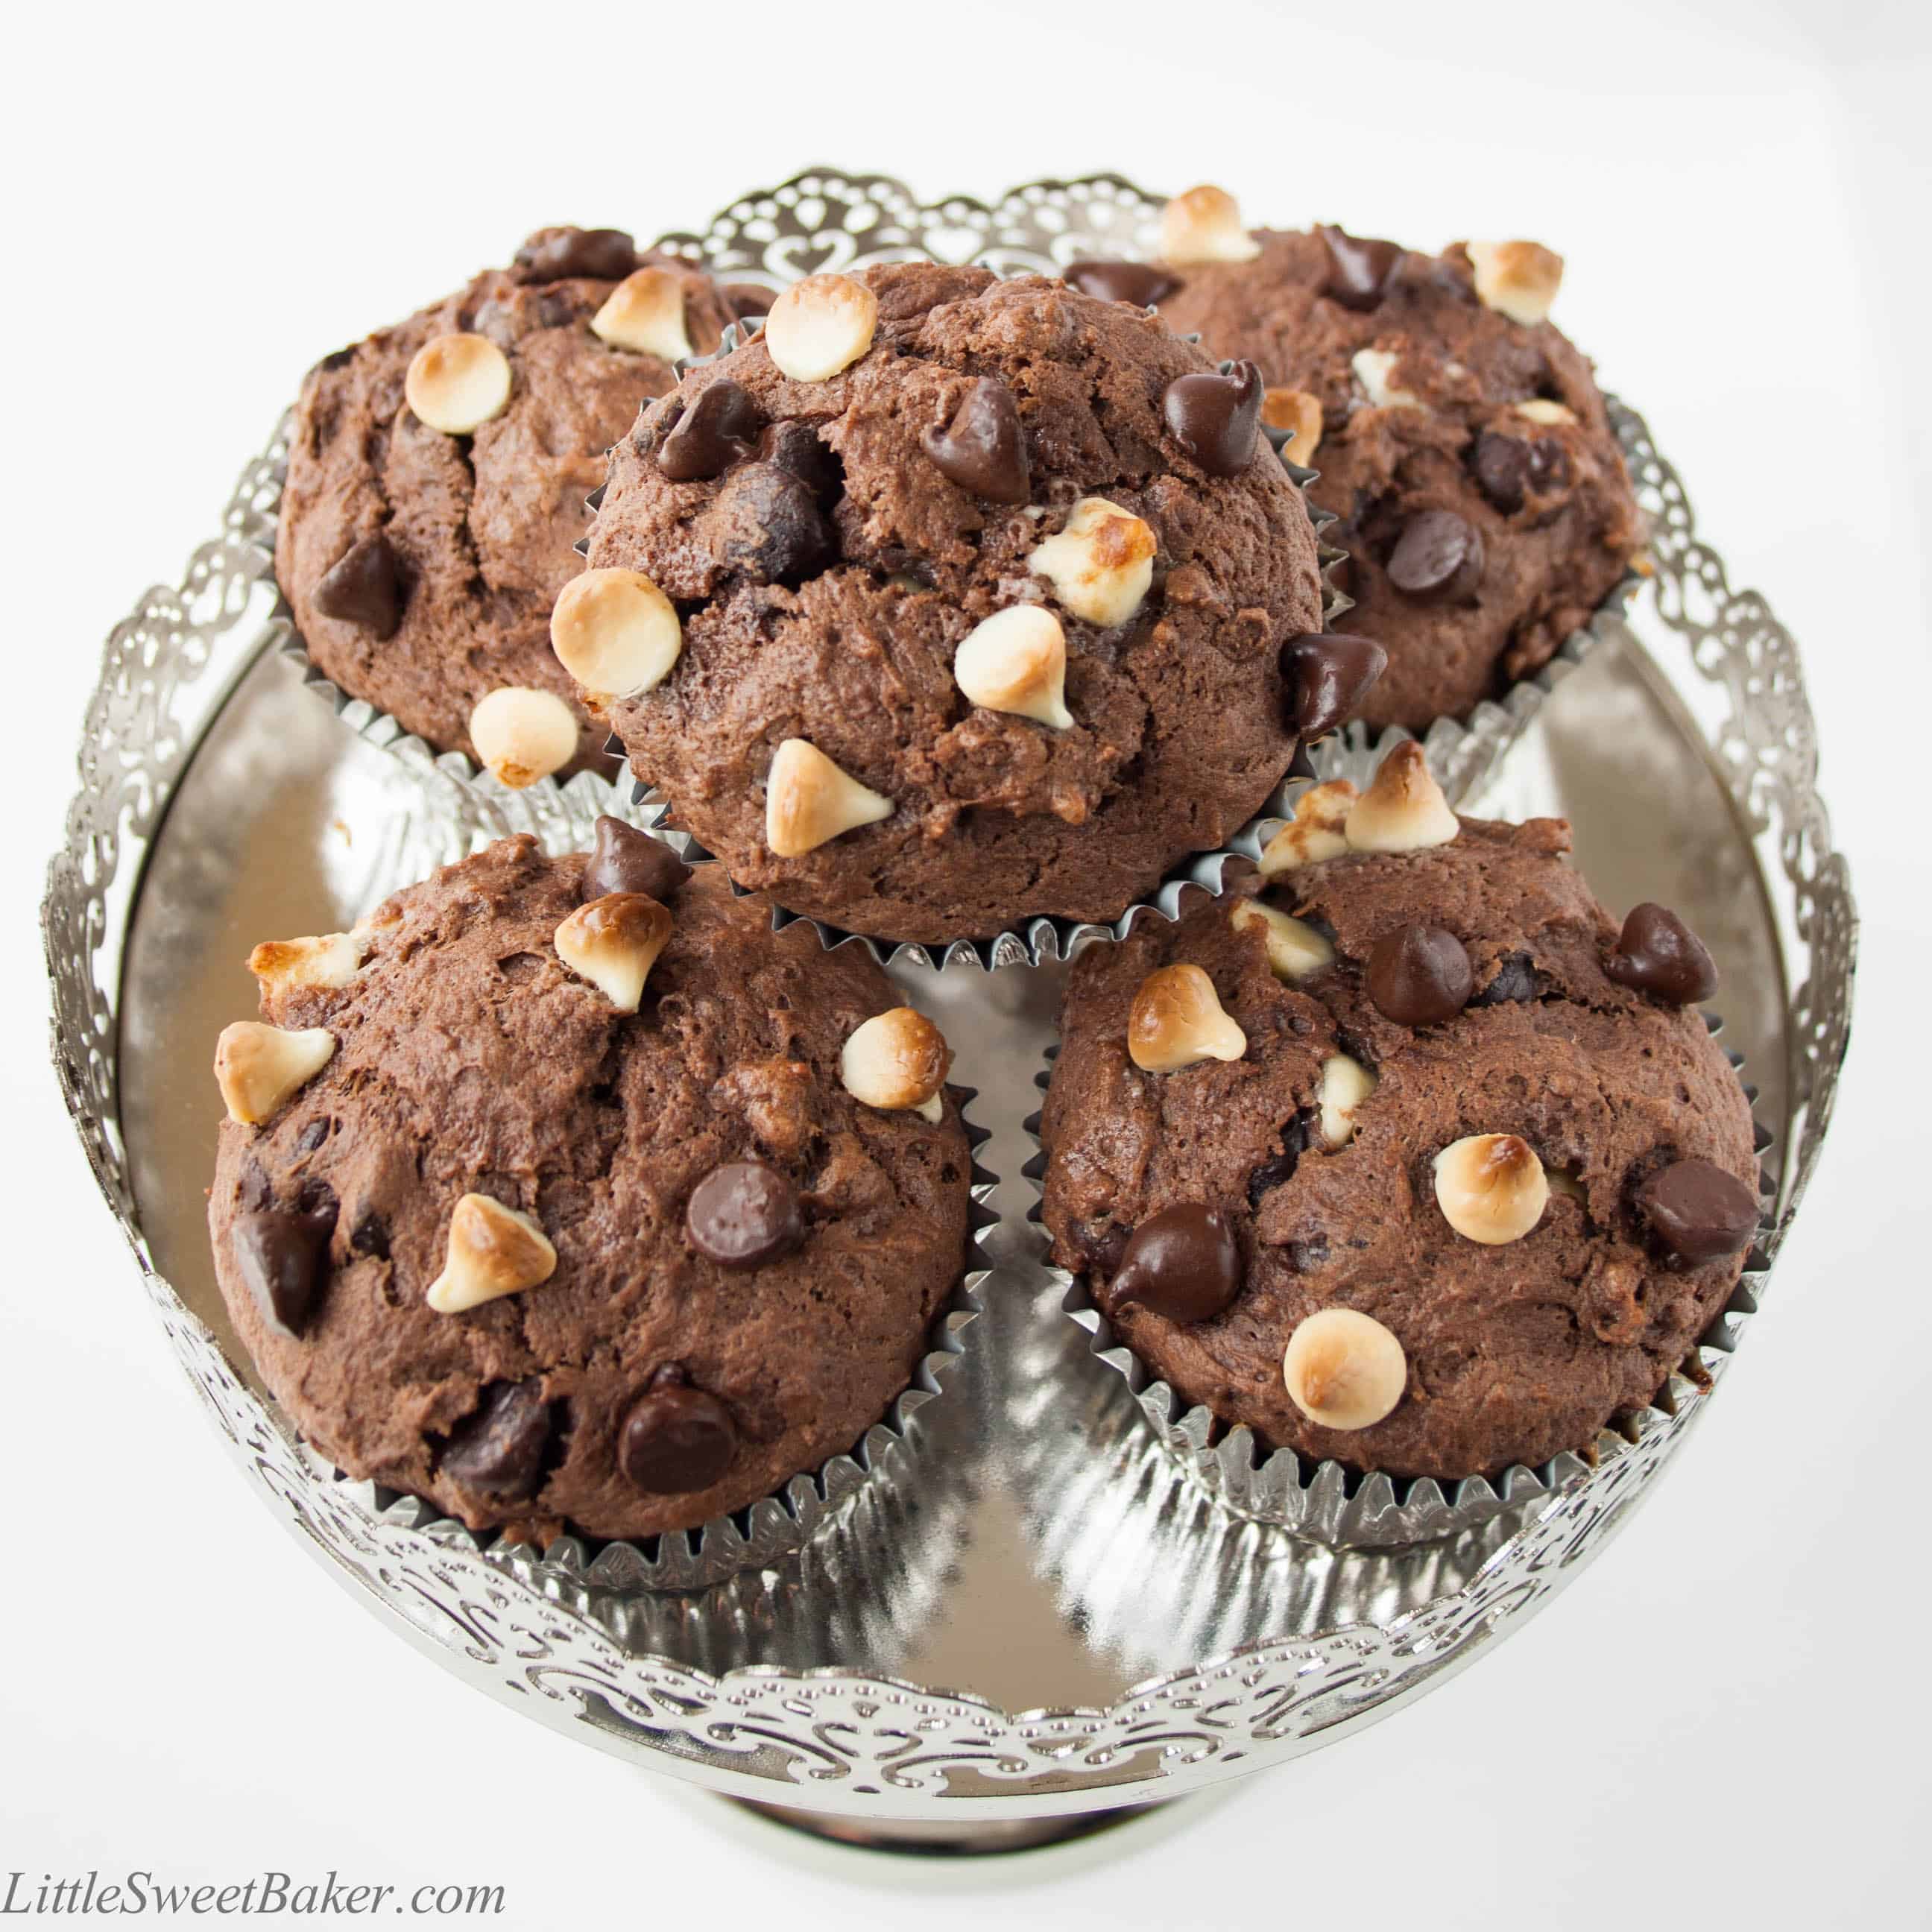 TRIPLE CHOCOLATE MUFFINS. Sour cream chocolate muffin with dark and white chocolate chips. Moist and full of chocolate-y flavors. Great for breakfast or as a snack.